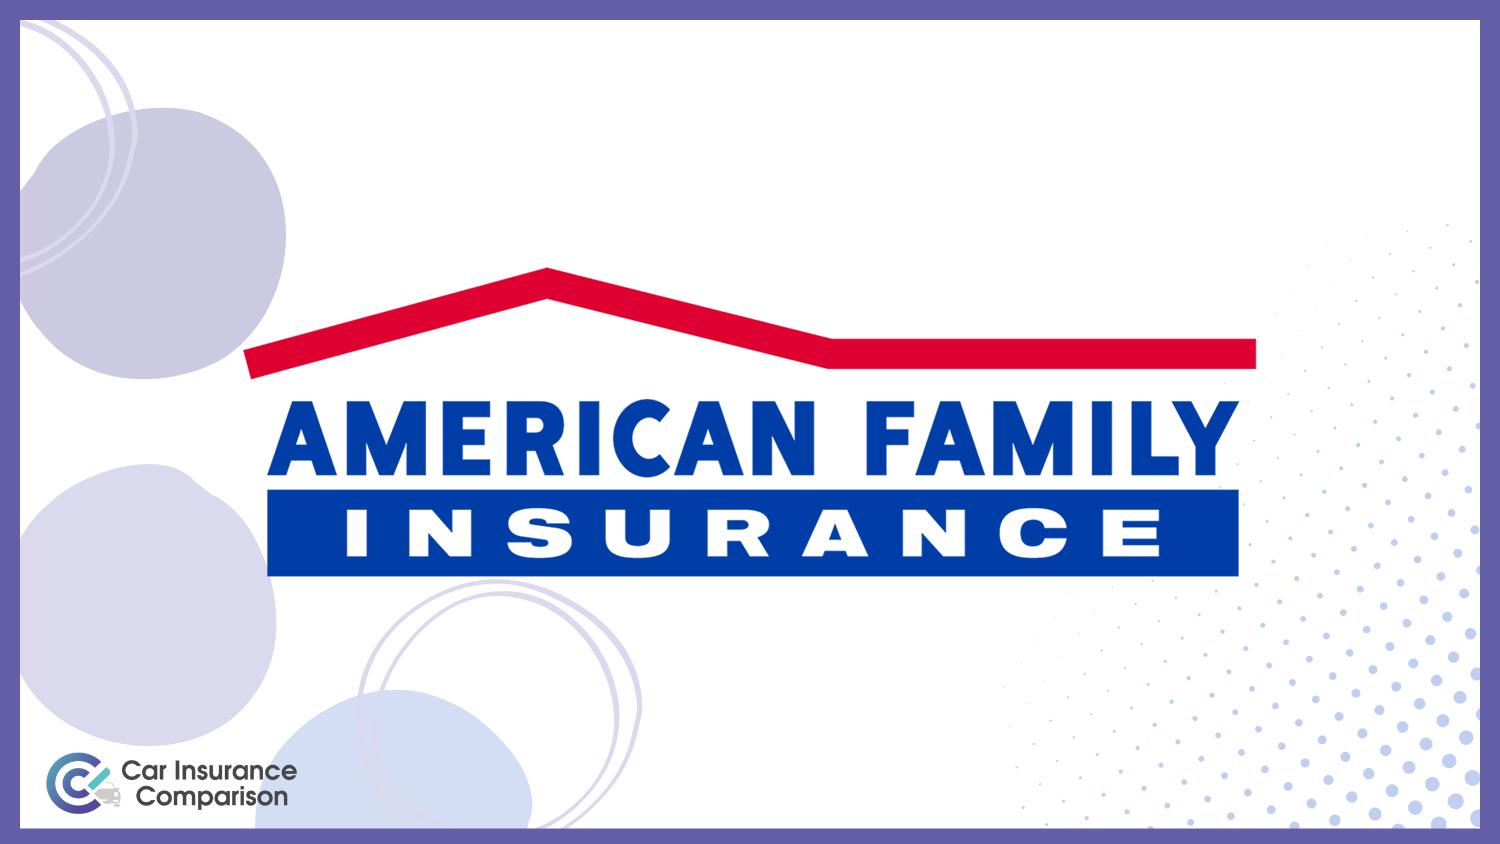 American Family: Best Car Insurance for Independent Contractors